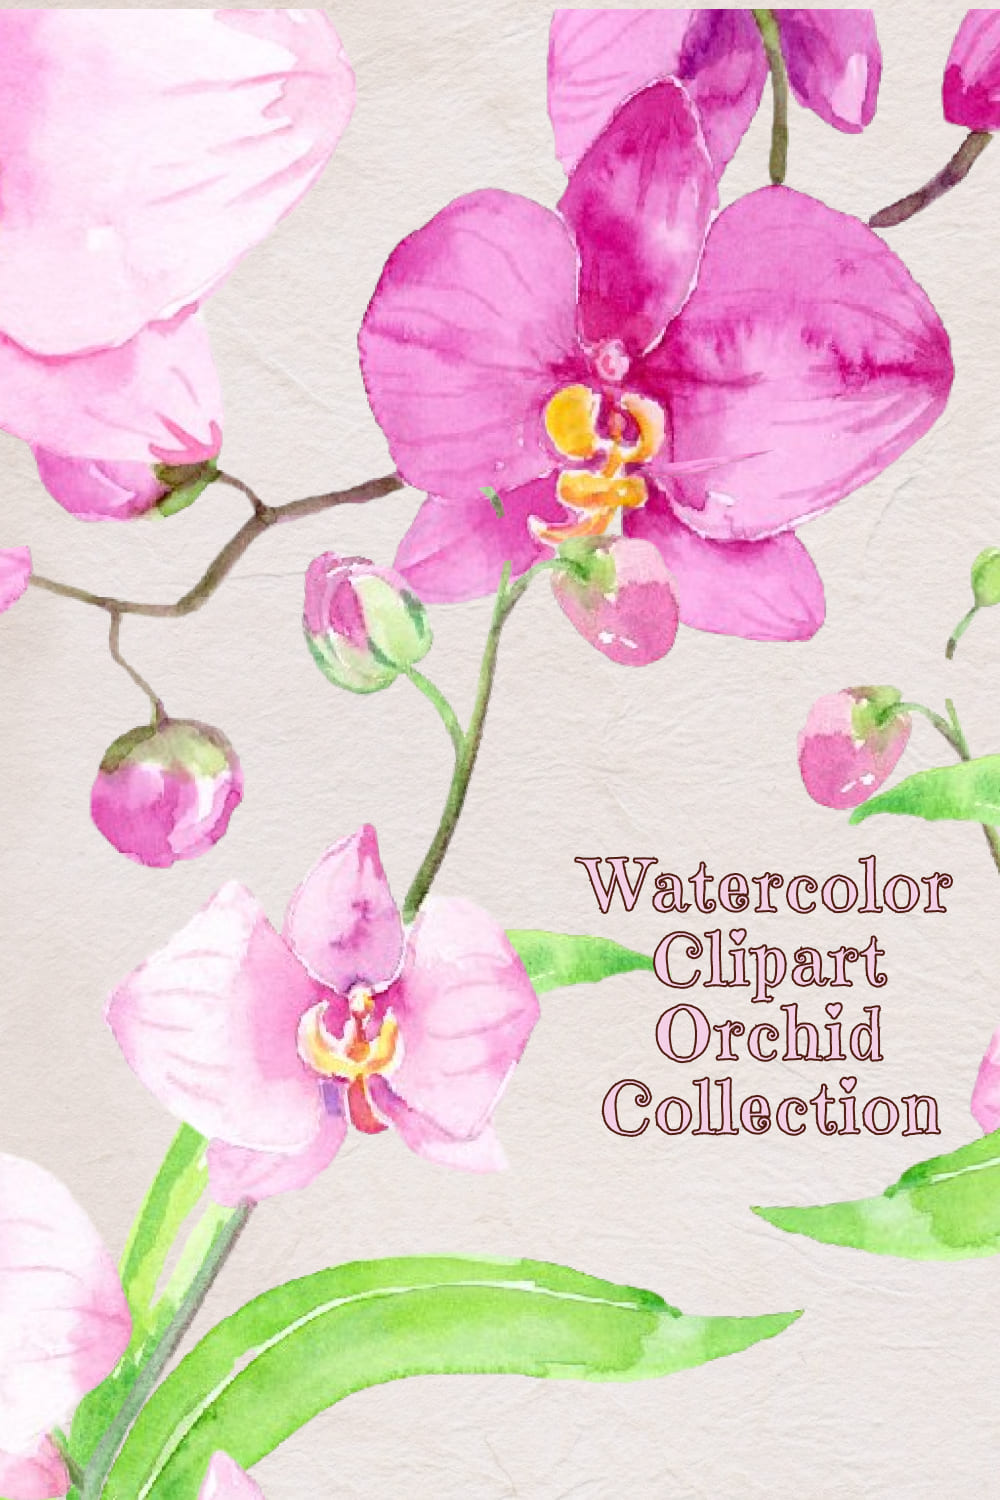 Watercolor Clipart Orchid Collection - preview image.